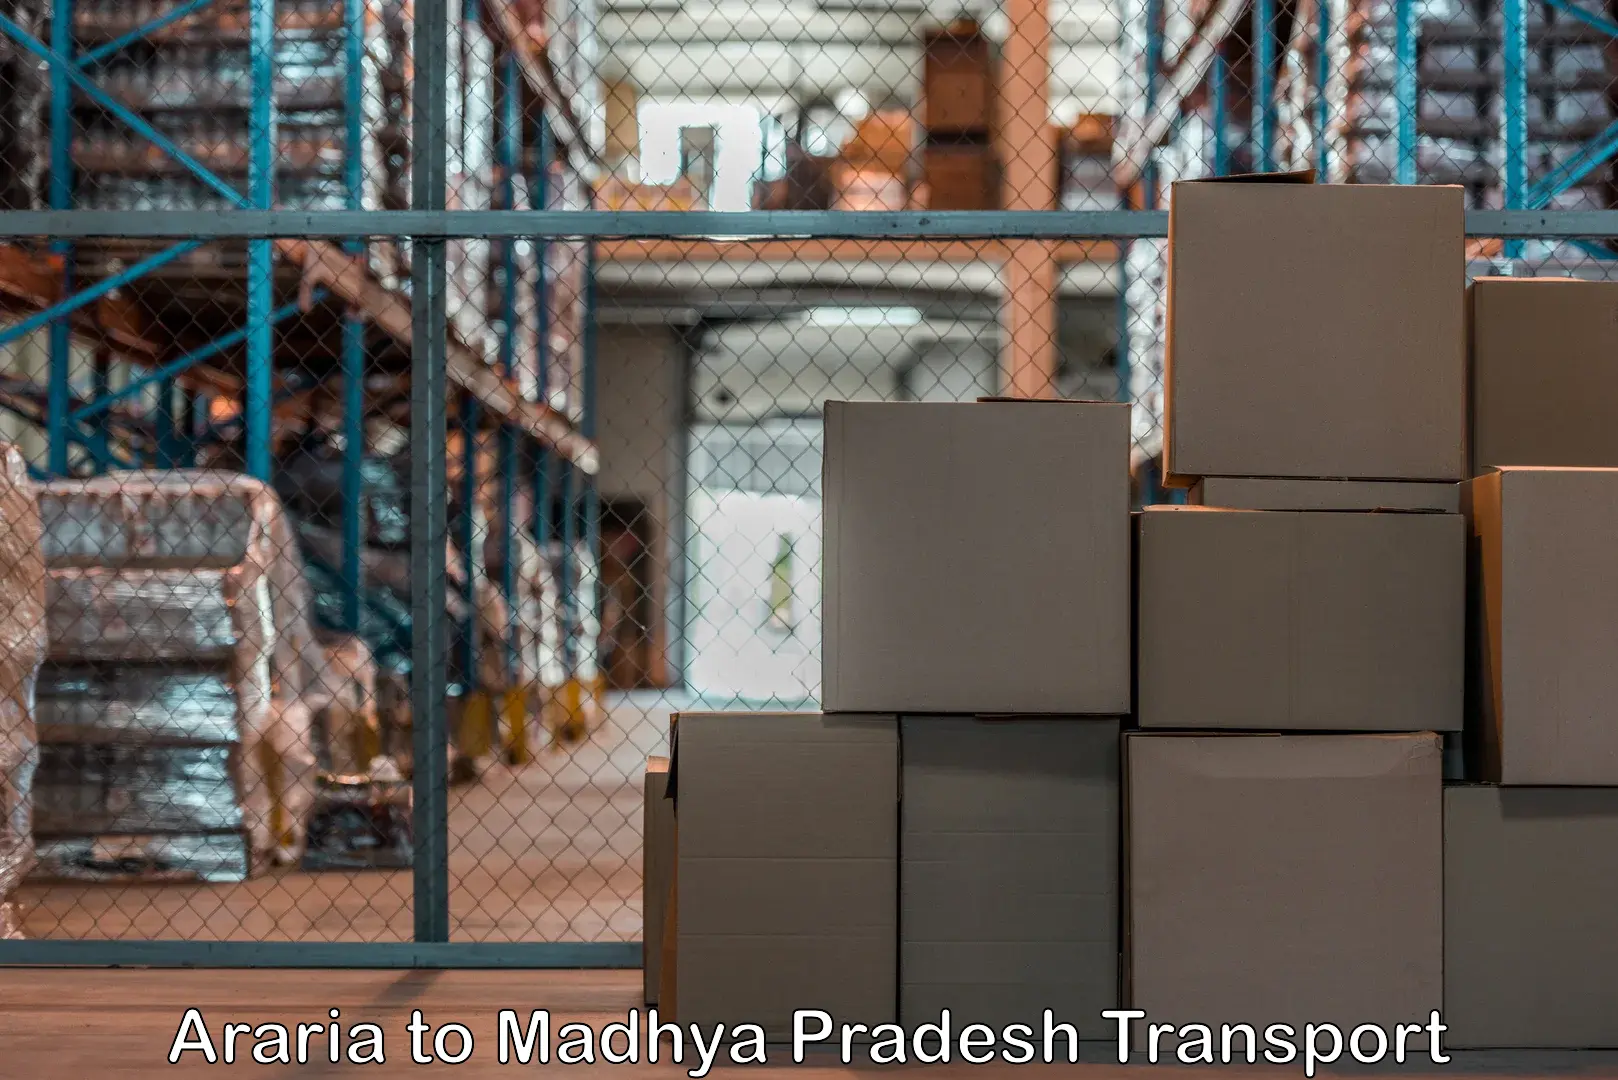 Daily parcel service transport in Araria to Pachore